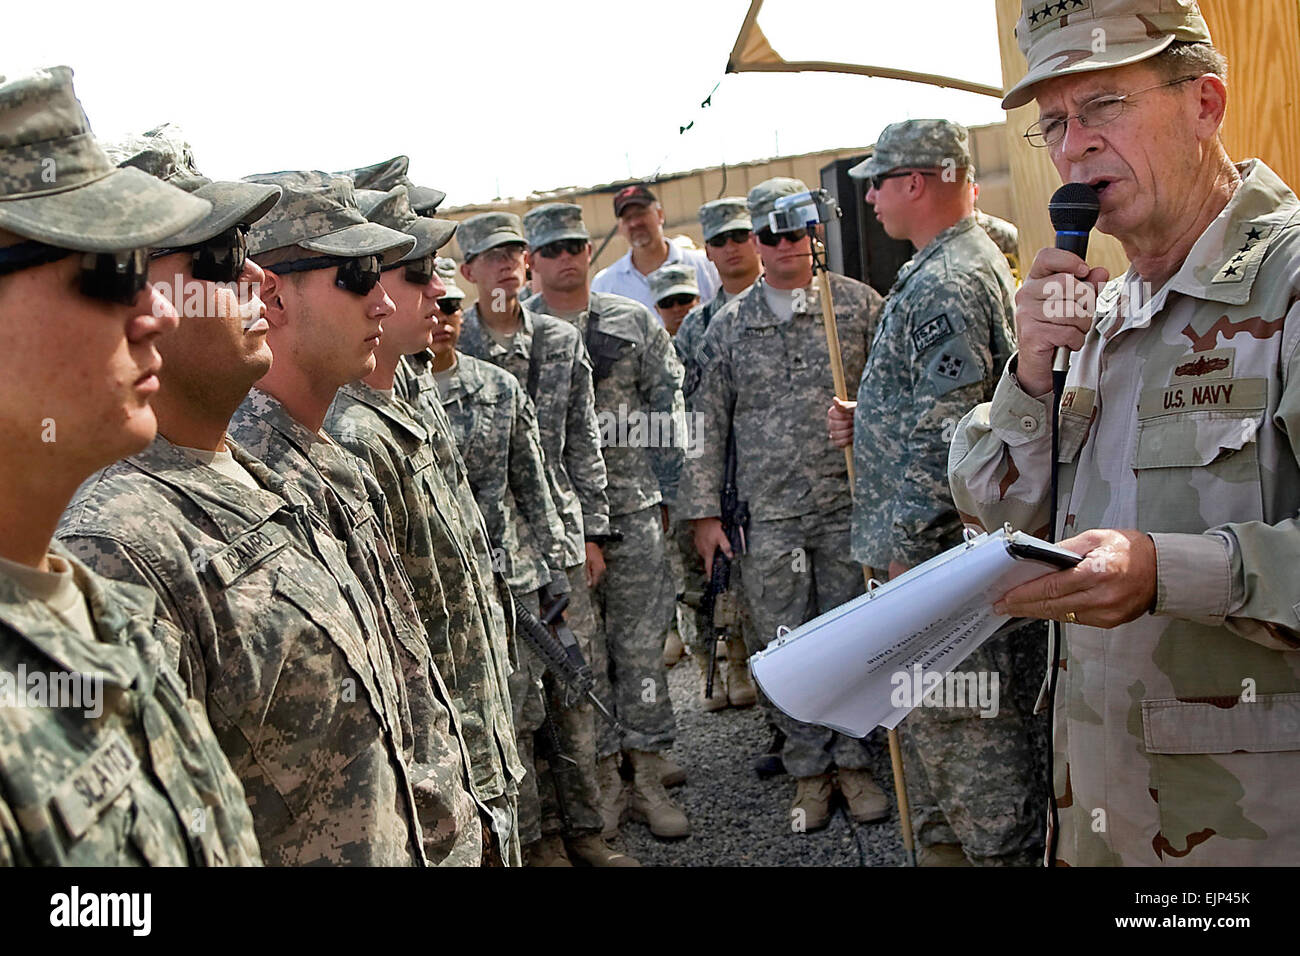 U.S. Navy Adm. Mike Mullen, chairman of the Joint Chiefs of Staff, reads the citations for seven Soldiers receiving Purple Heart honors on Forward Operating Base Ramrod, July 17, 2009, for wounds sustained in Helmand province, Afghanistan.  U.S. Navy Petty Officer 1st Class Chad J. McNeeley Stock Photo